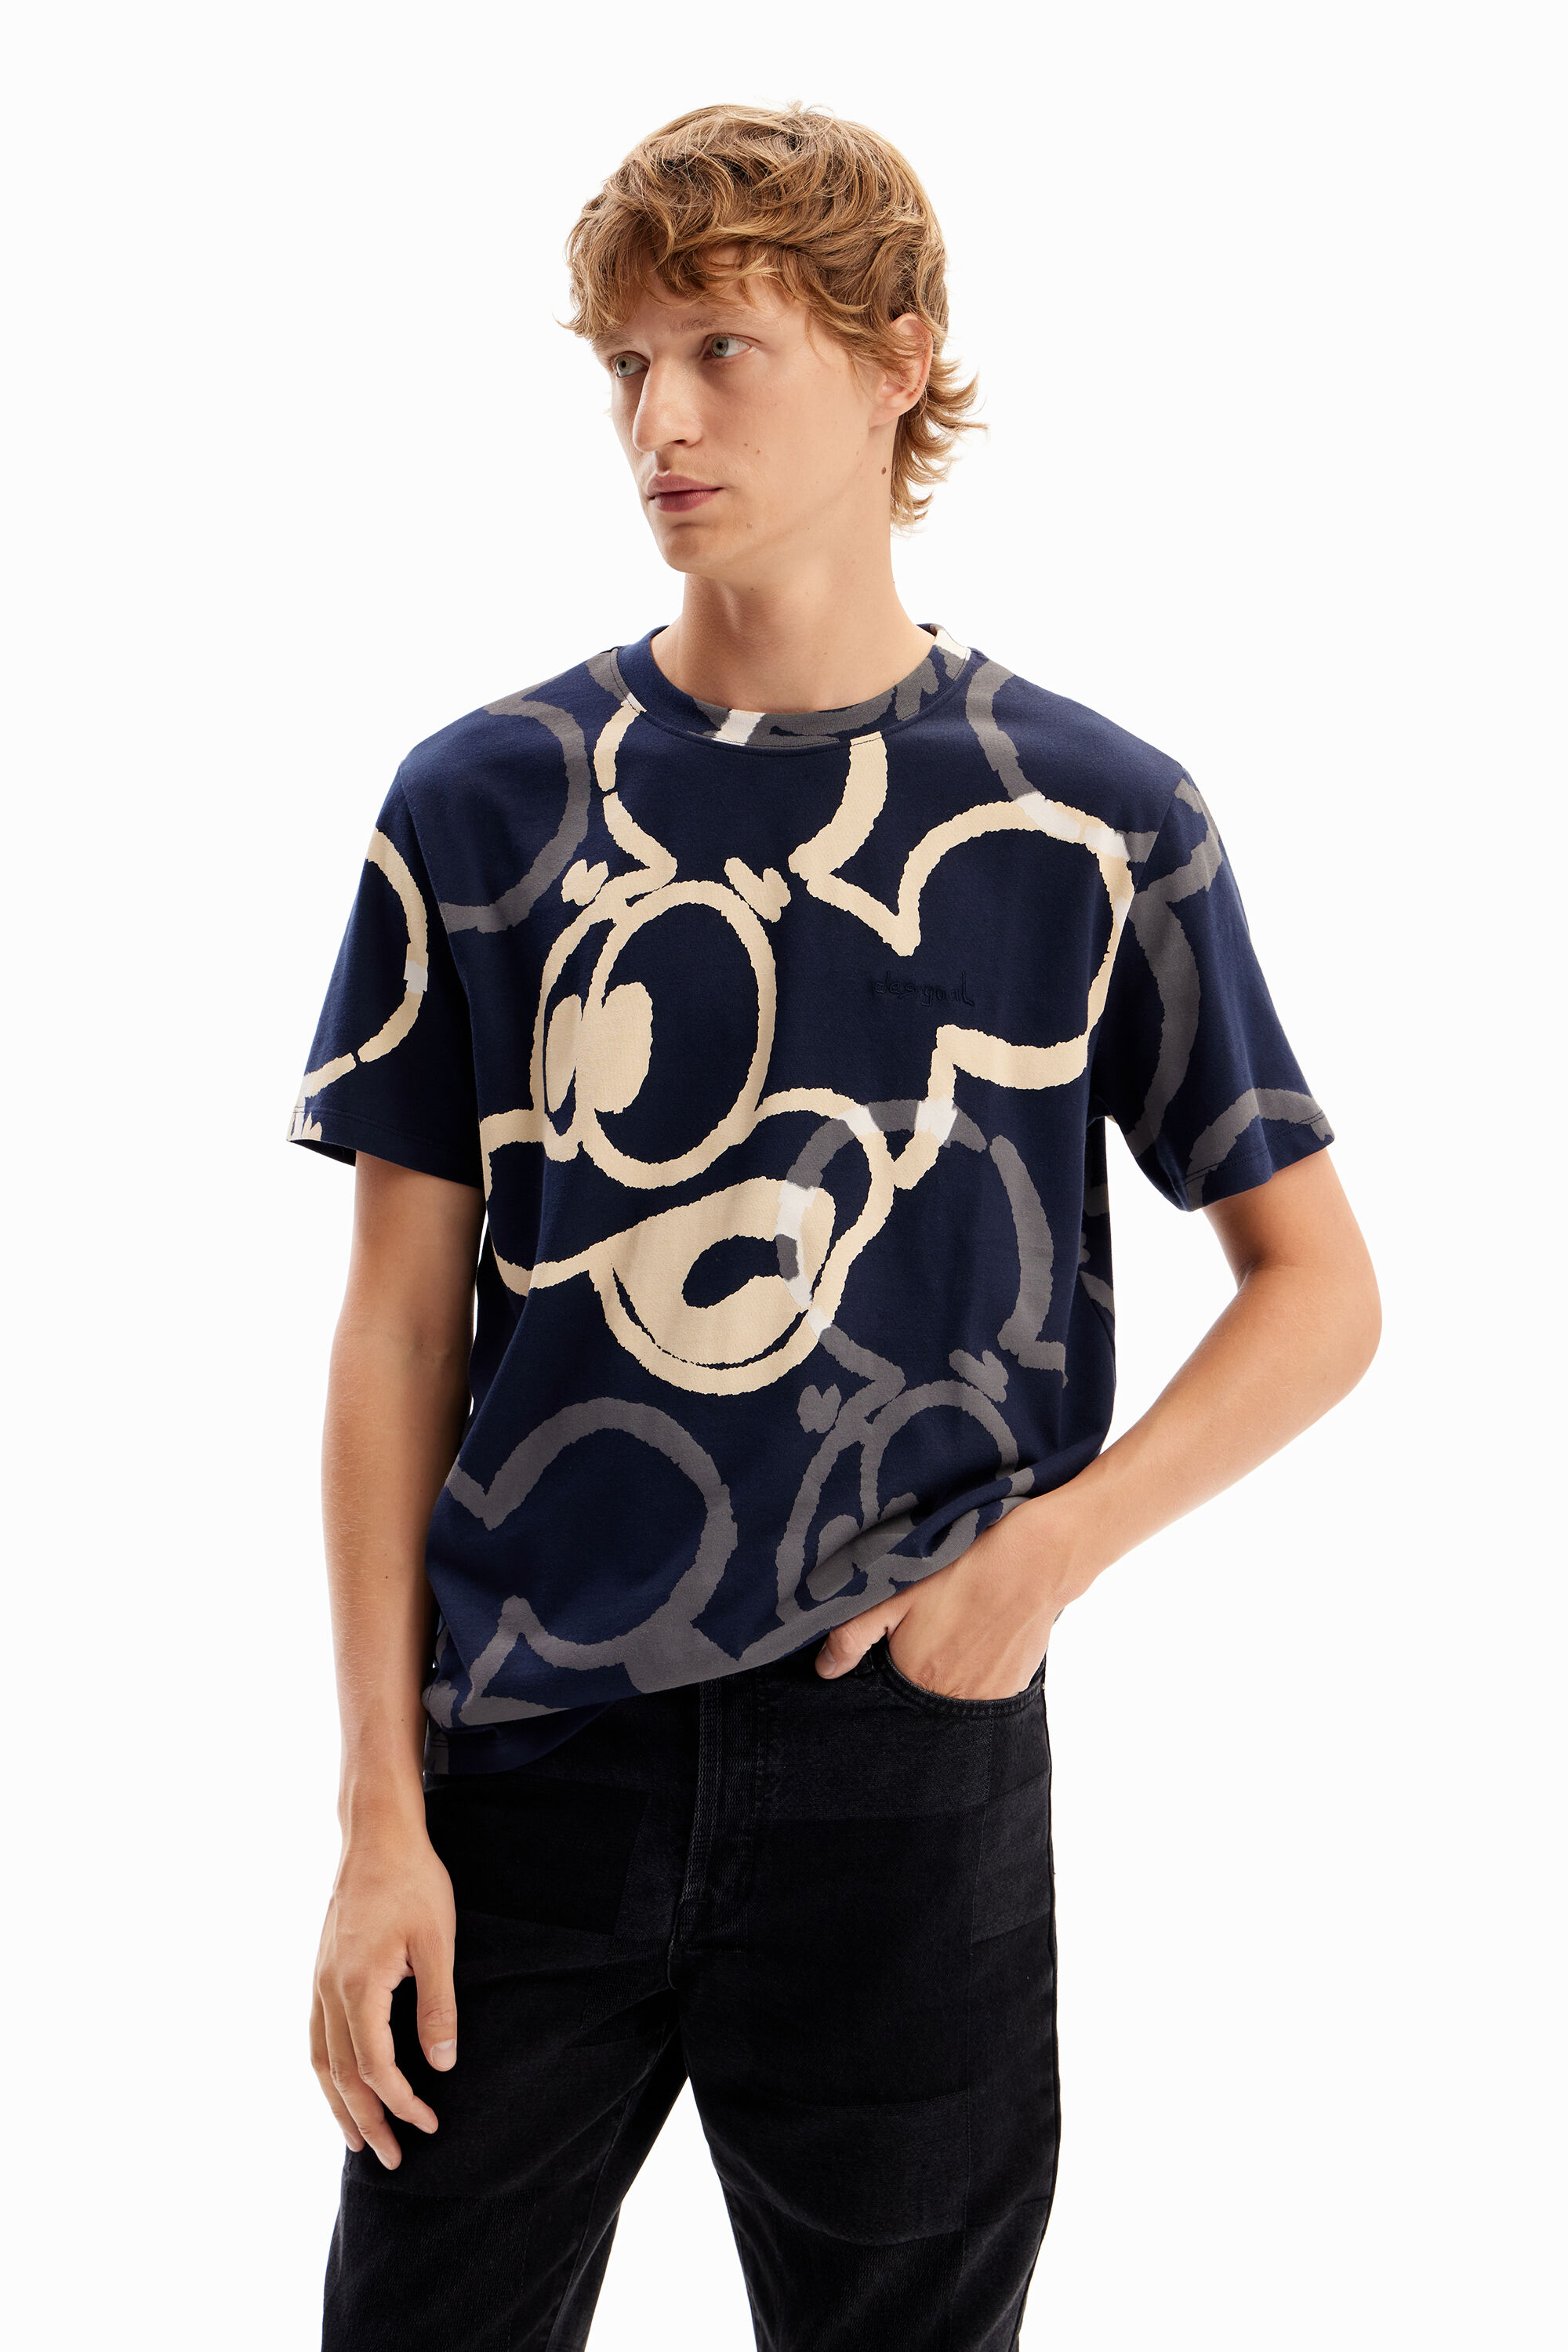 Arty Mickey Mouse T-shirt - BLUE - S